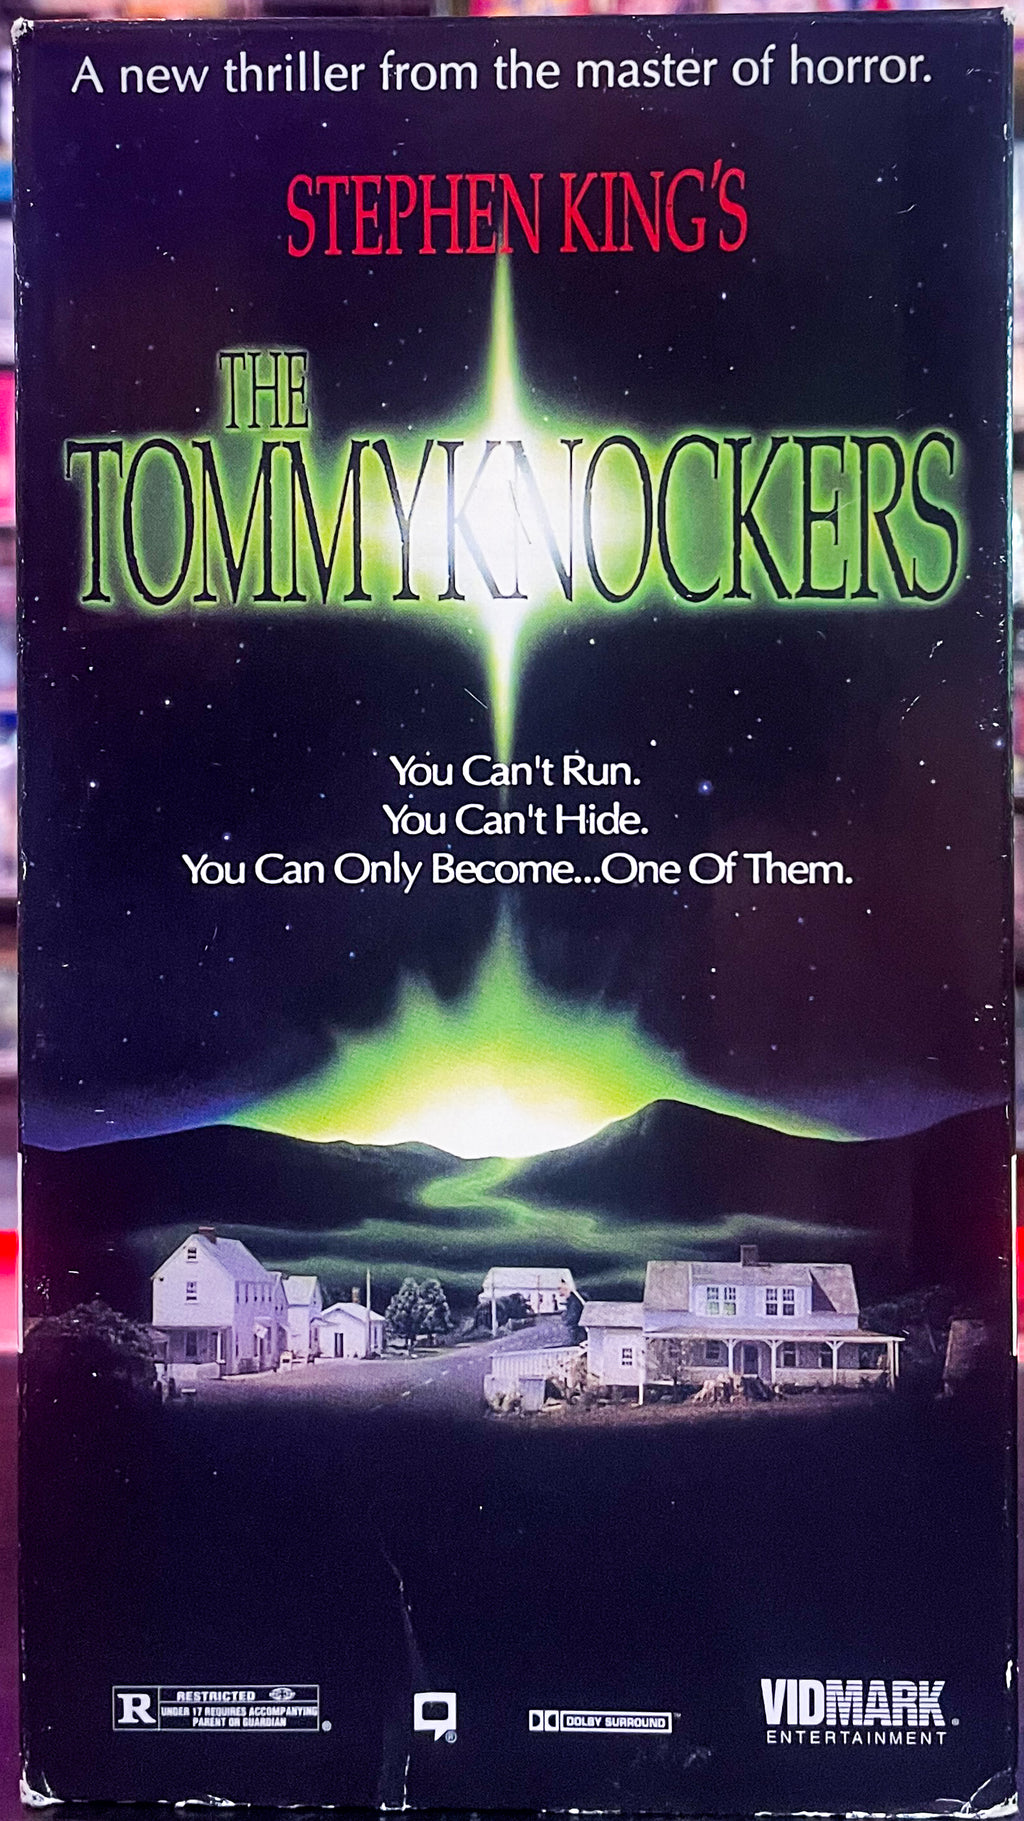 Stephen King’s The Tommyknockers